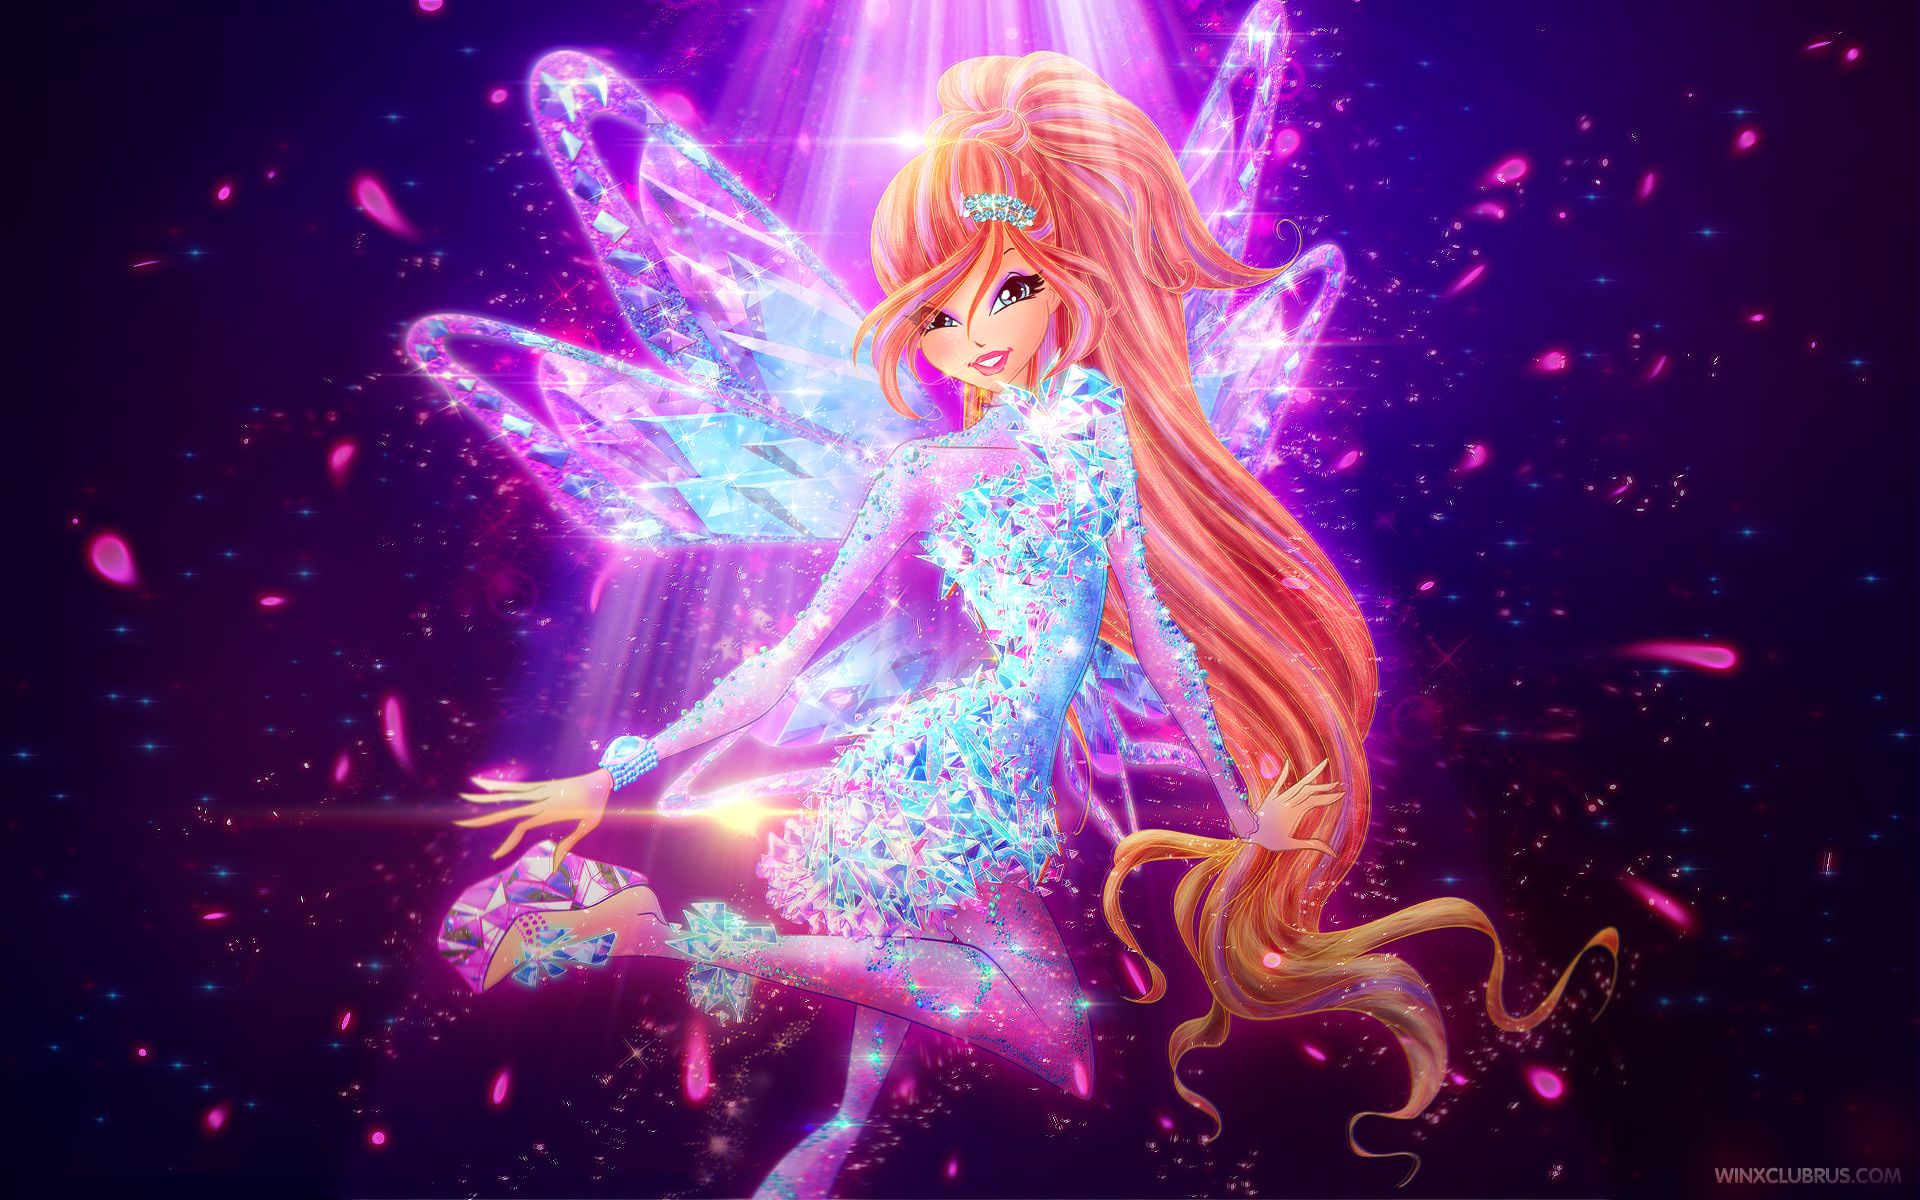 Winx Club in World of Winx and couture style wallpaper